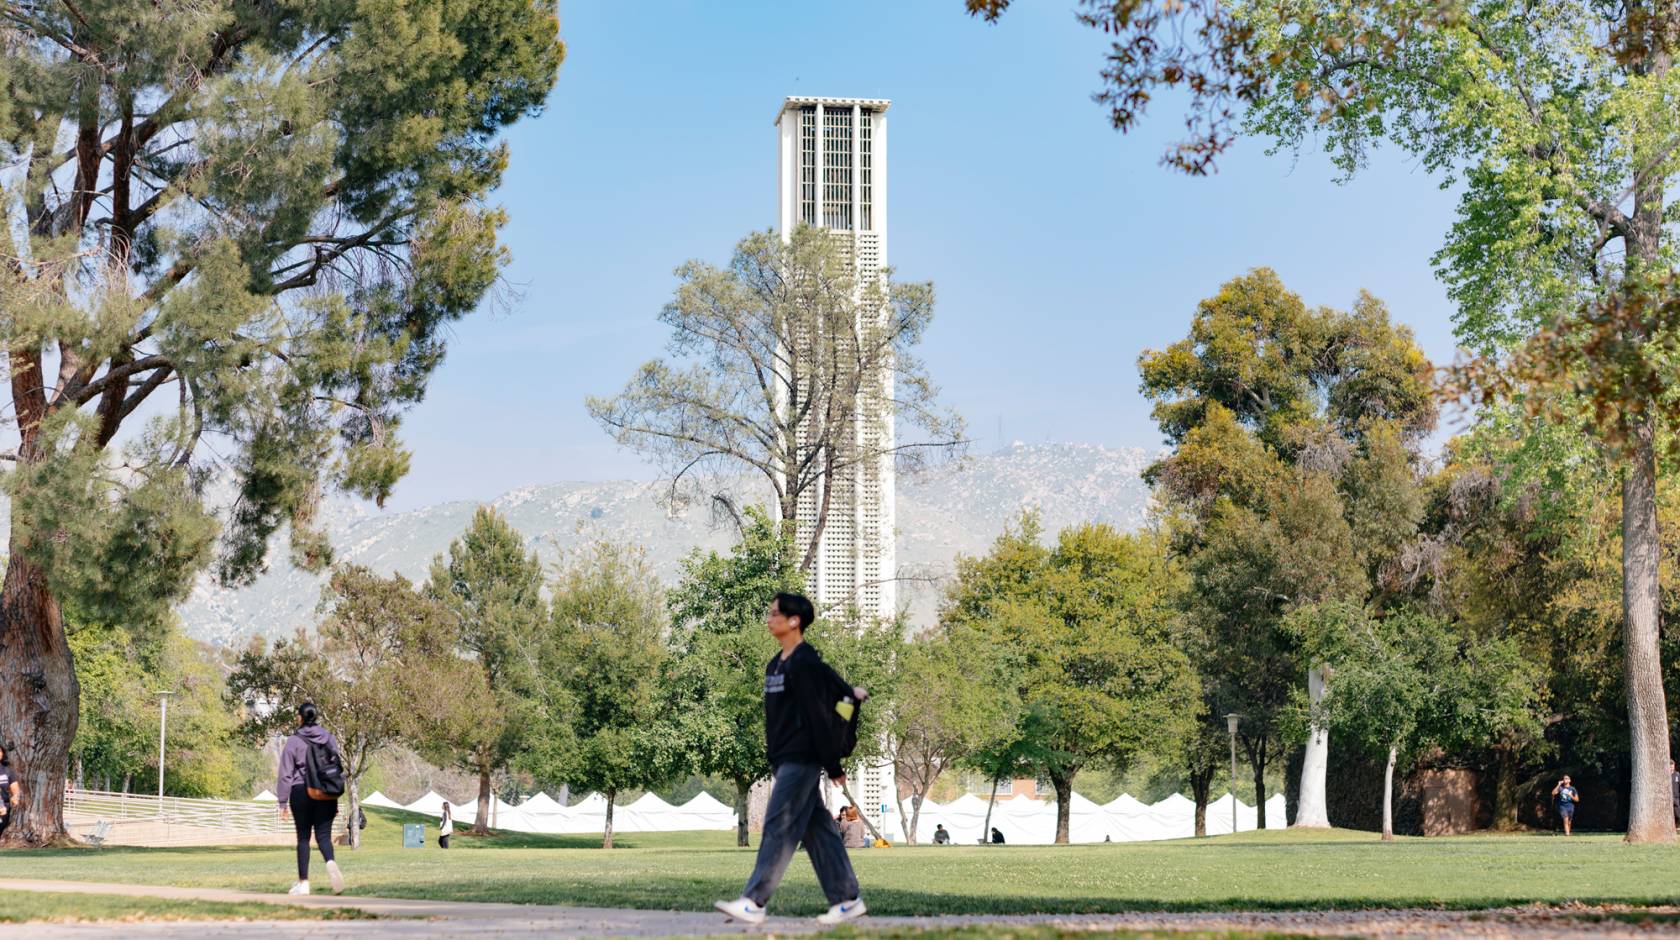 UC Riverside campus on a sunny day, tower in the background